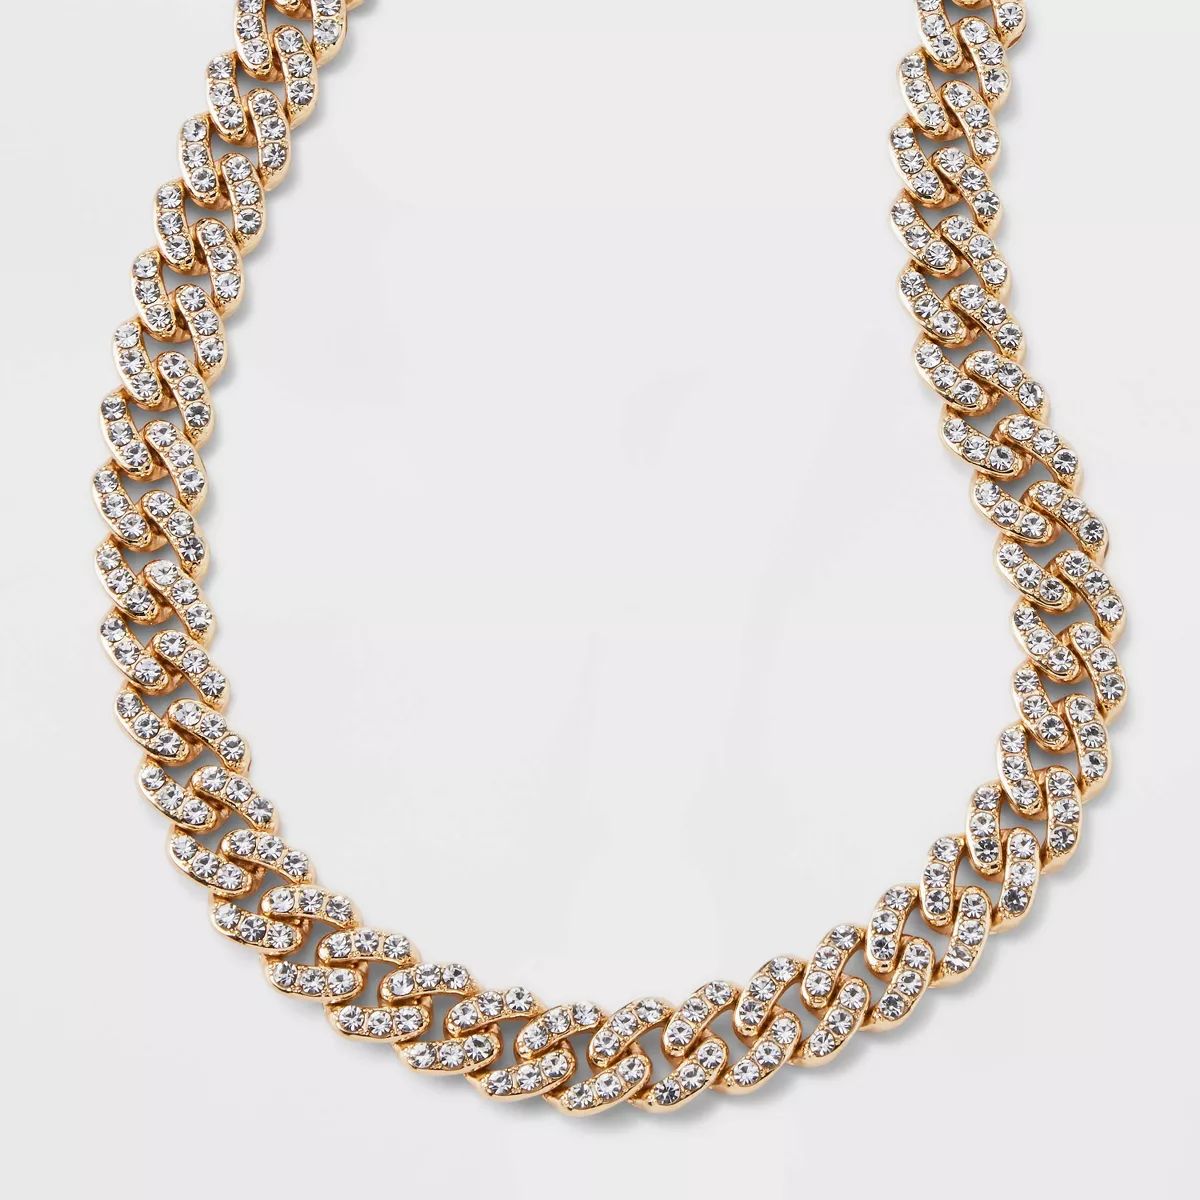 SUGARFIX by BaubleBar Gold and Crystal Curb Chain Necklace - Gold | Target